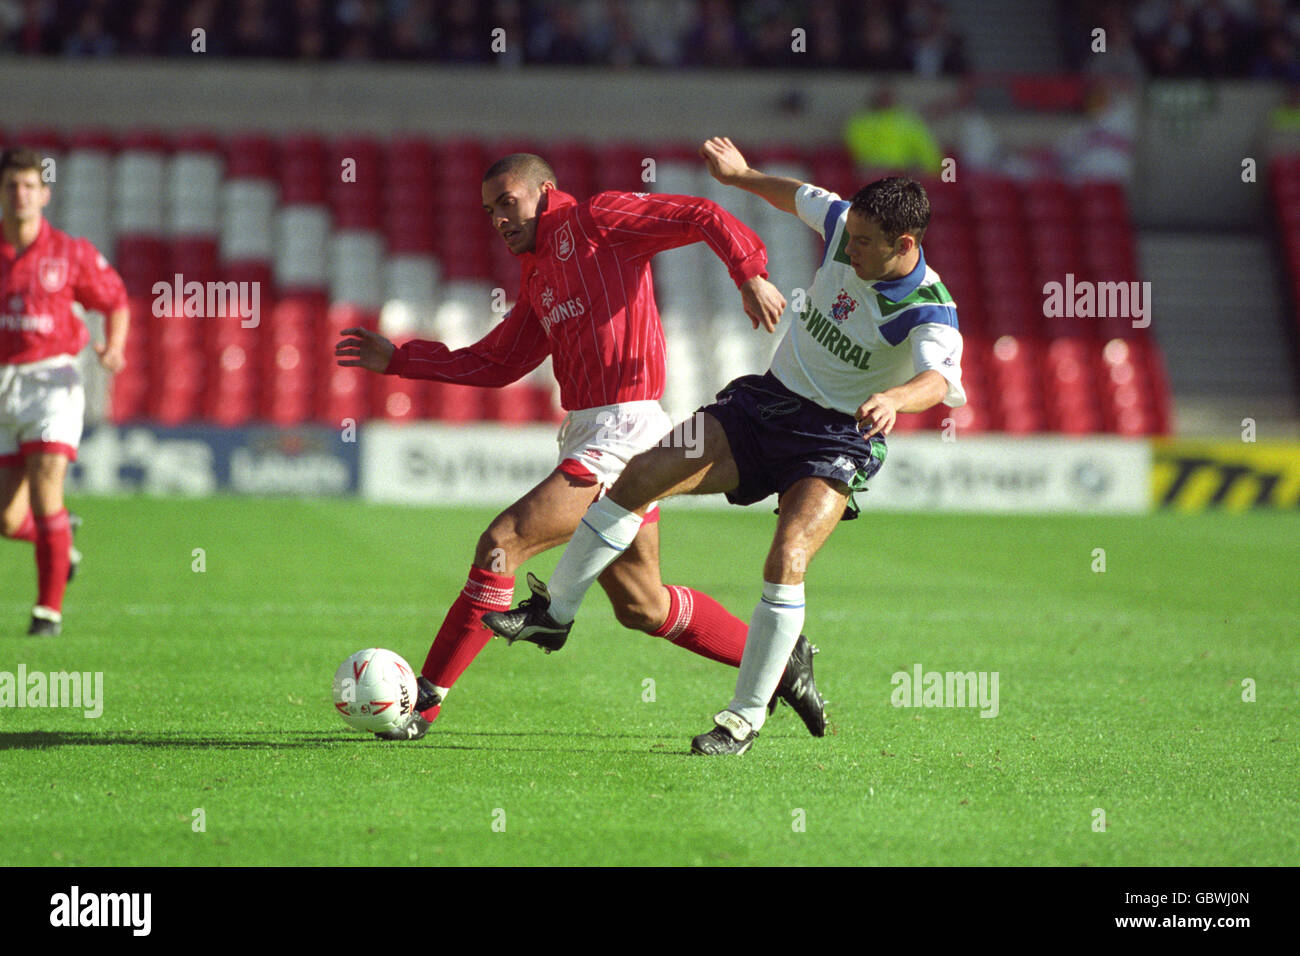 Soccer - Endsleigh League Division One - Nottingham Forest v Tranmere Rovers - City Ground Stock Photo